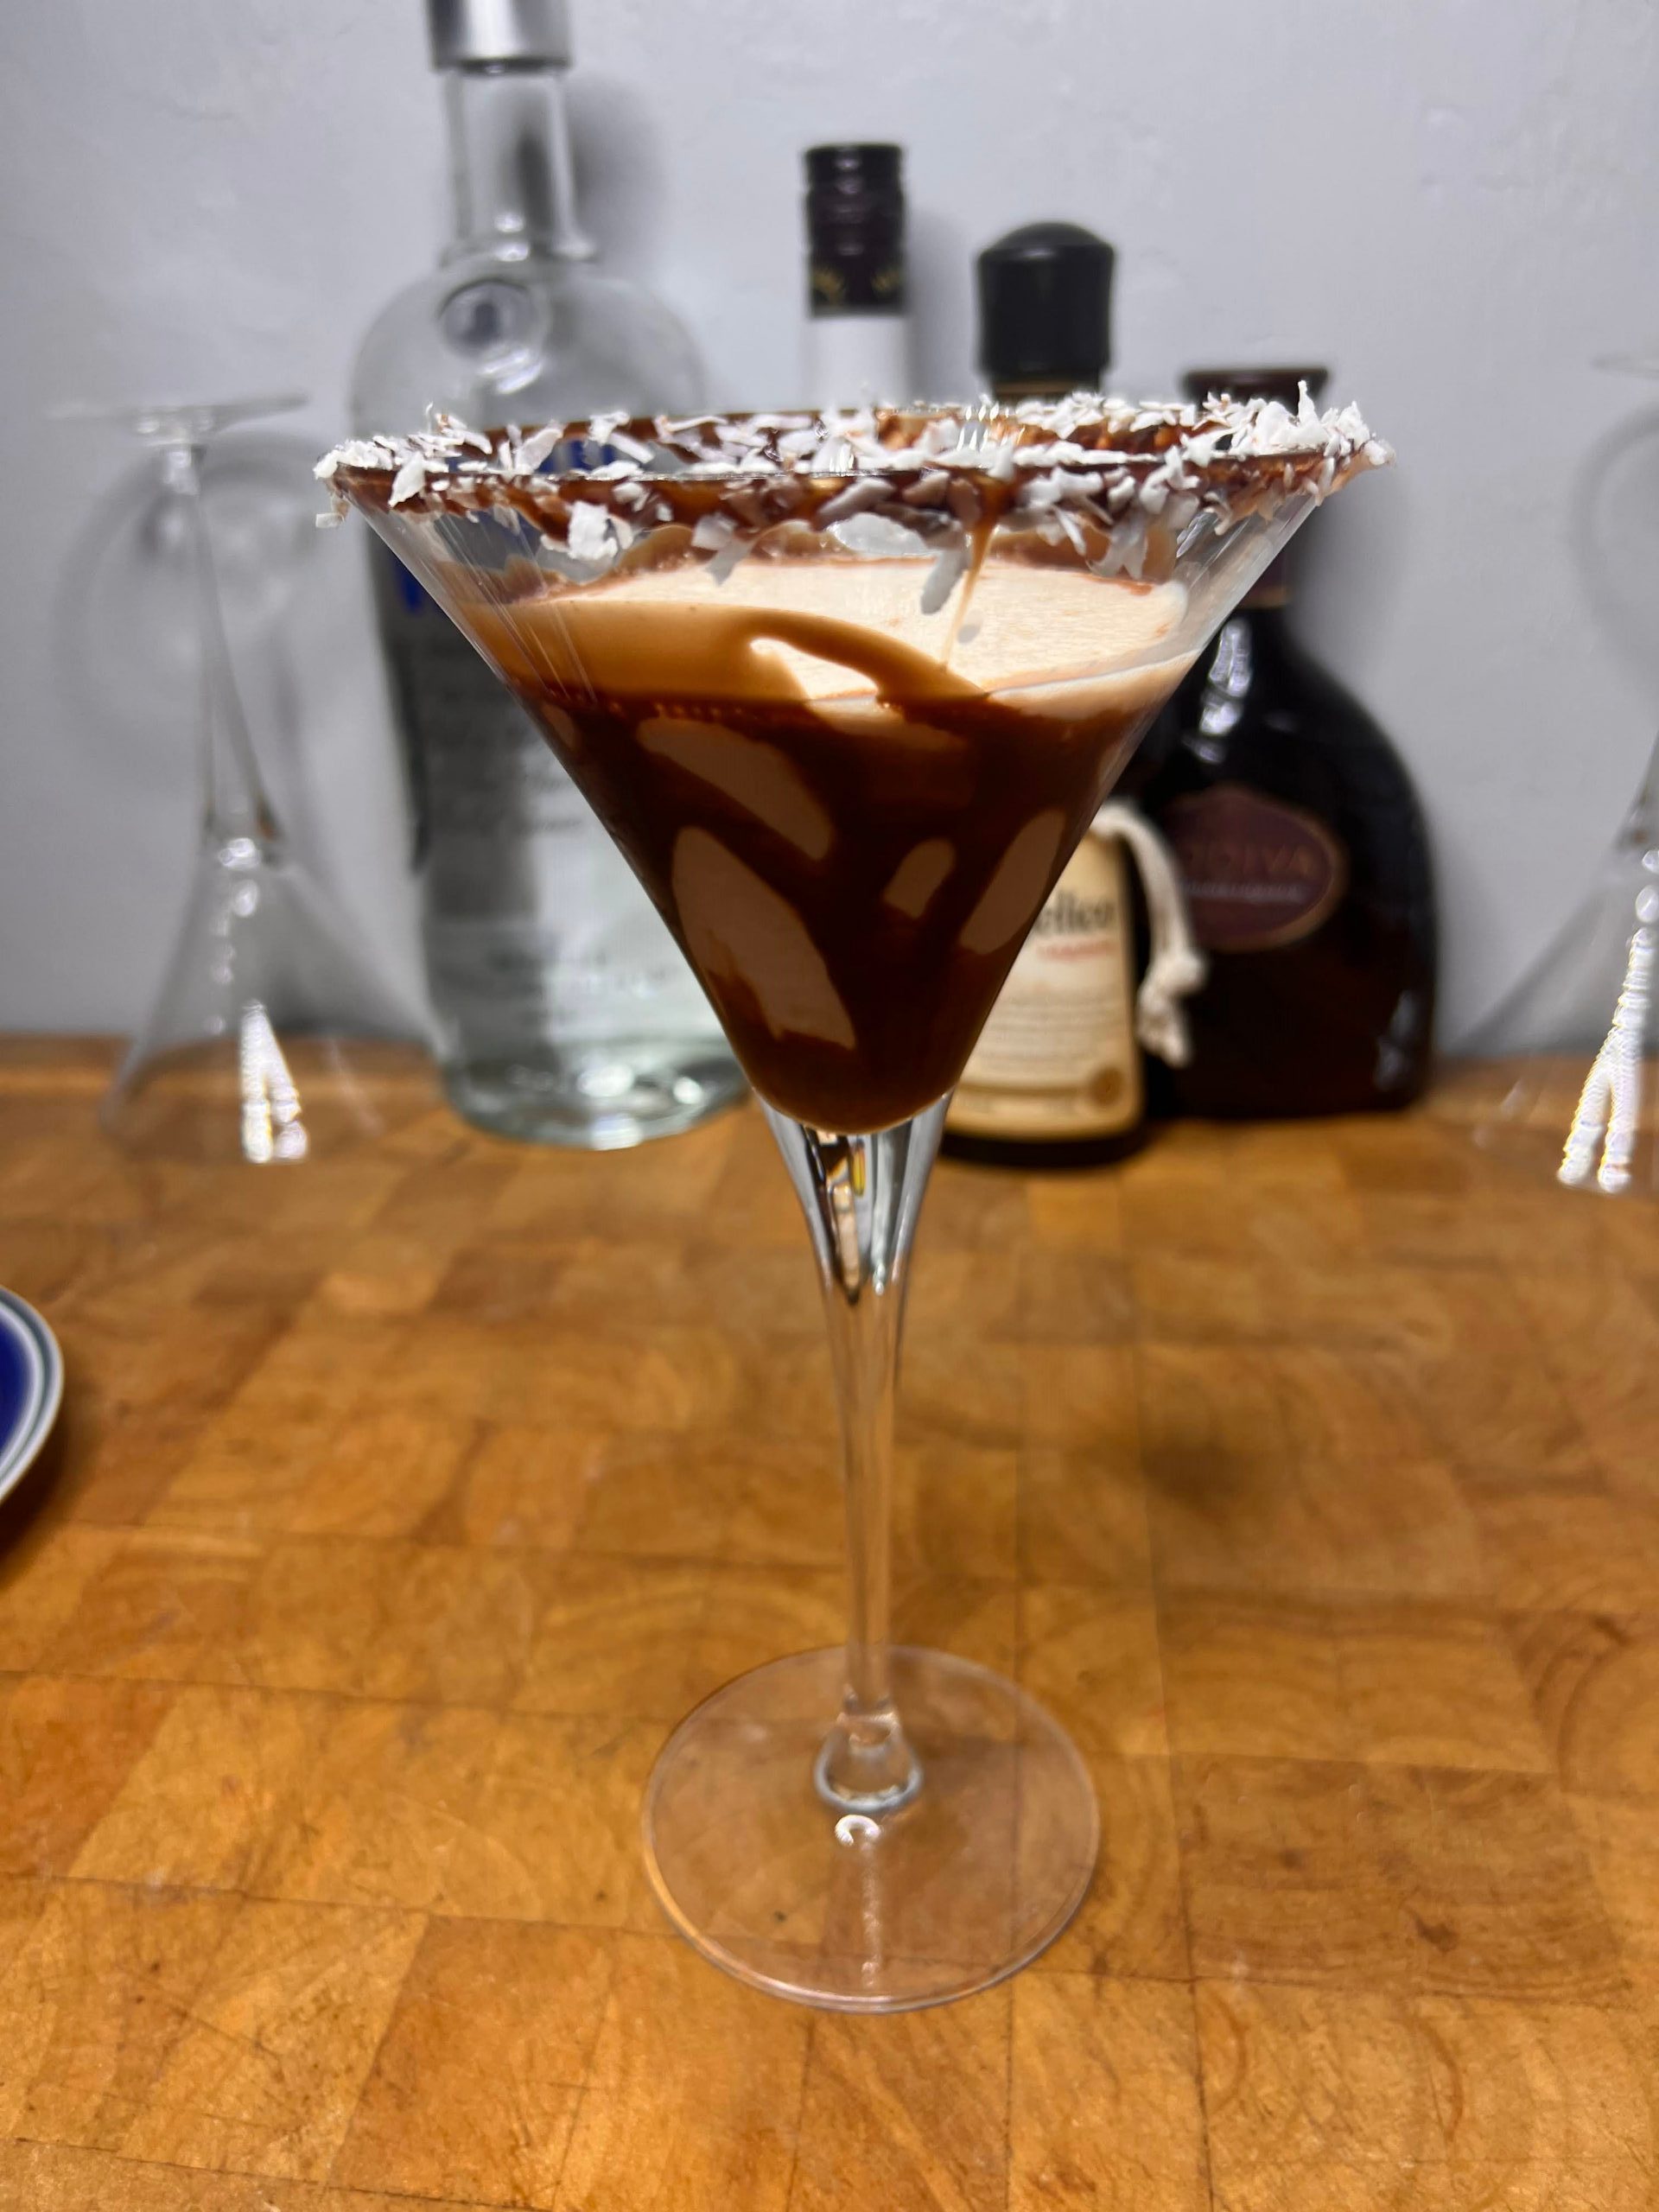 close up of almond joy martini  with liquor bottles visible in the background